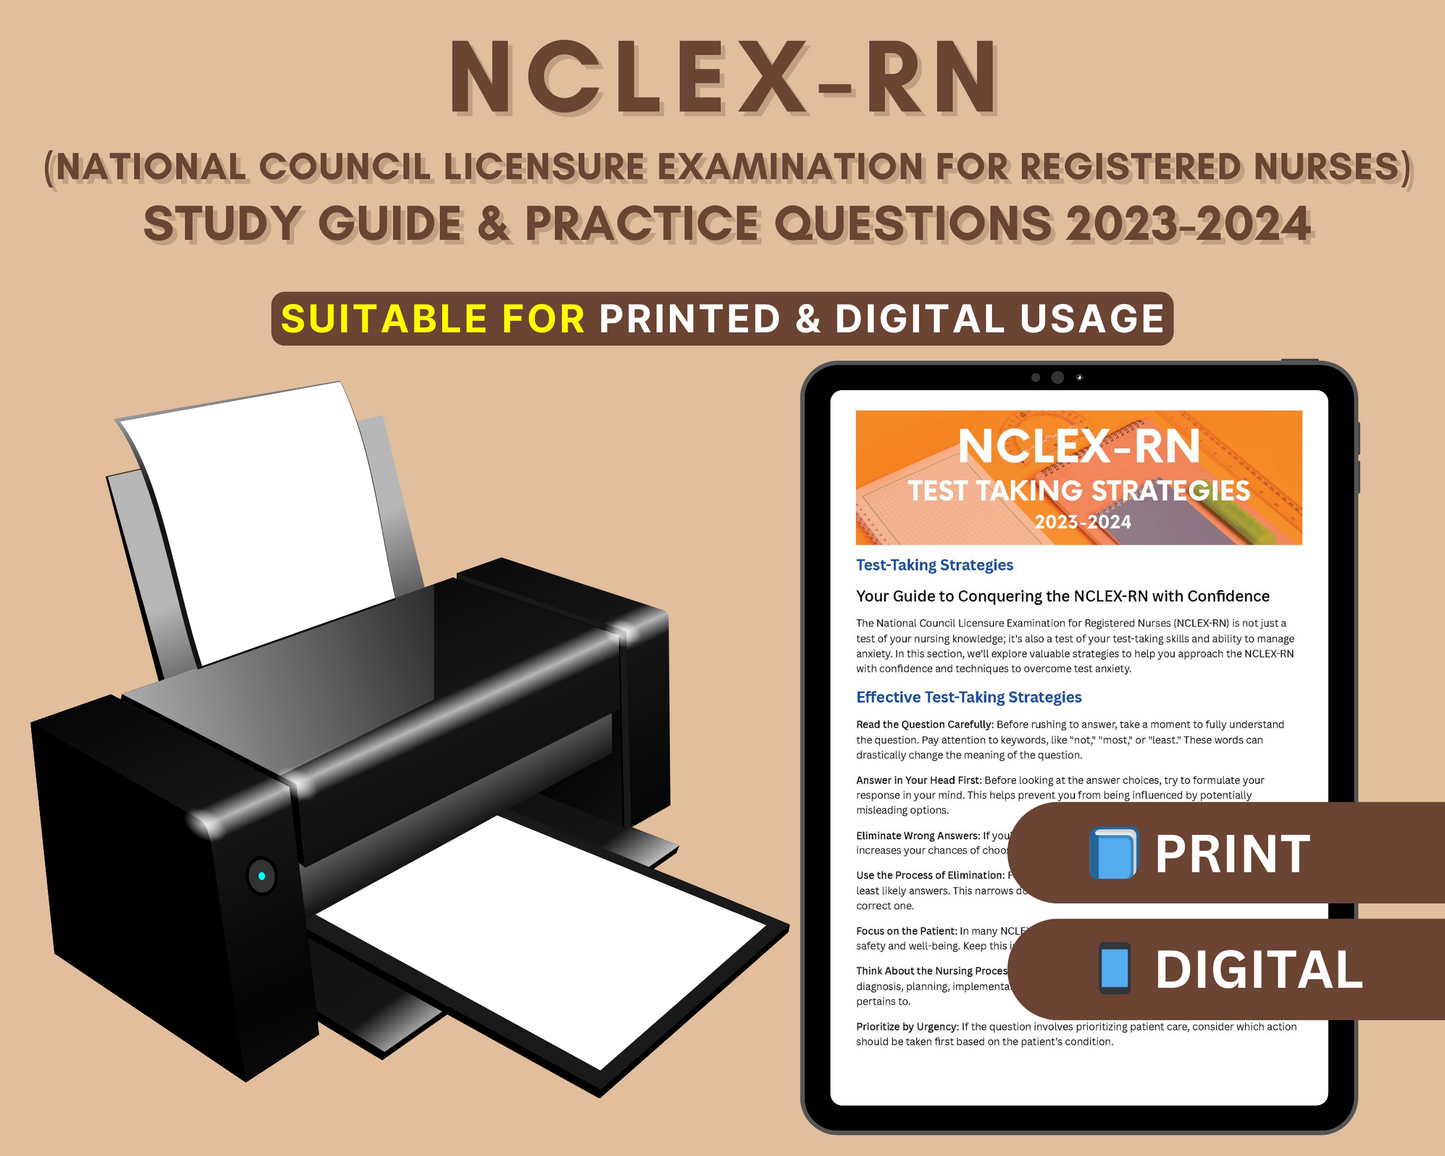 NCLEX-RN Study Guide 2023-2024: In-Depth Content Review, Practice Tests & Exam Strategies for Aspiring Nurses